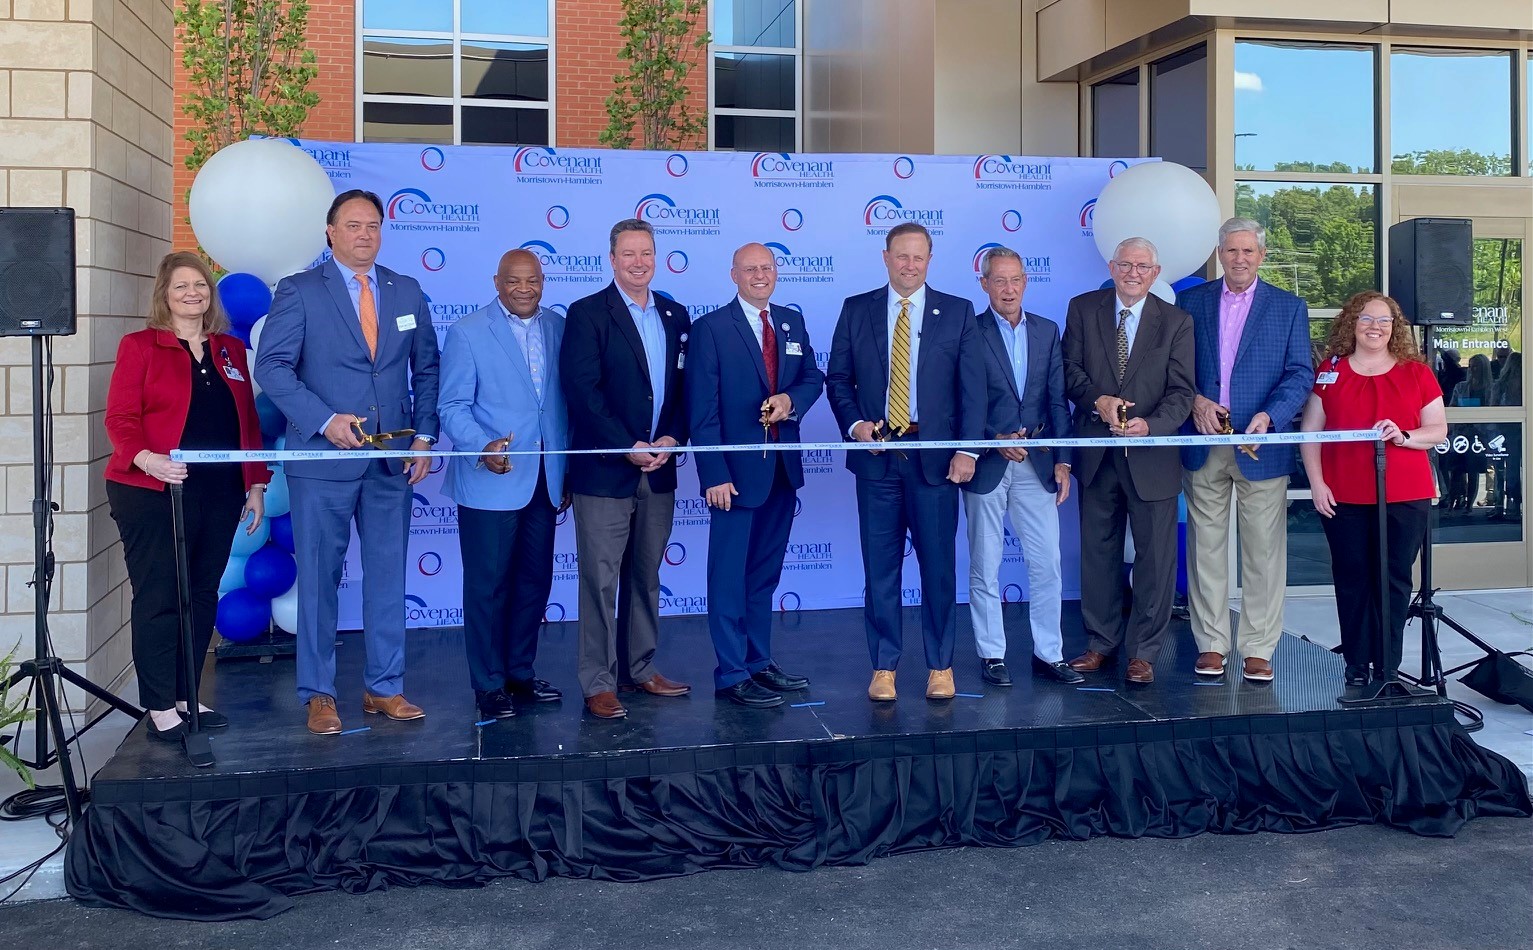 Covenant Health, Morristown-Hamblen Healthcare System and Morristown, Tennessee community leaders cut ribbon at Morristown-Hamblen West opening